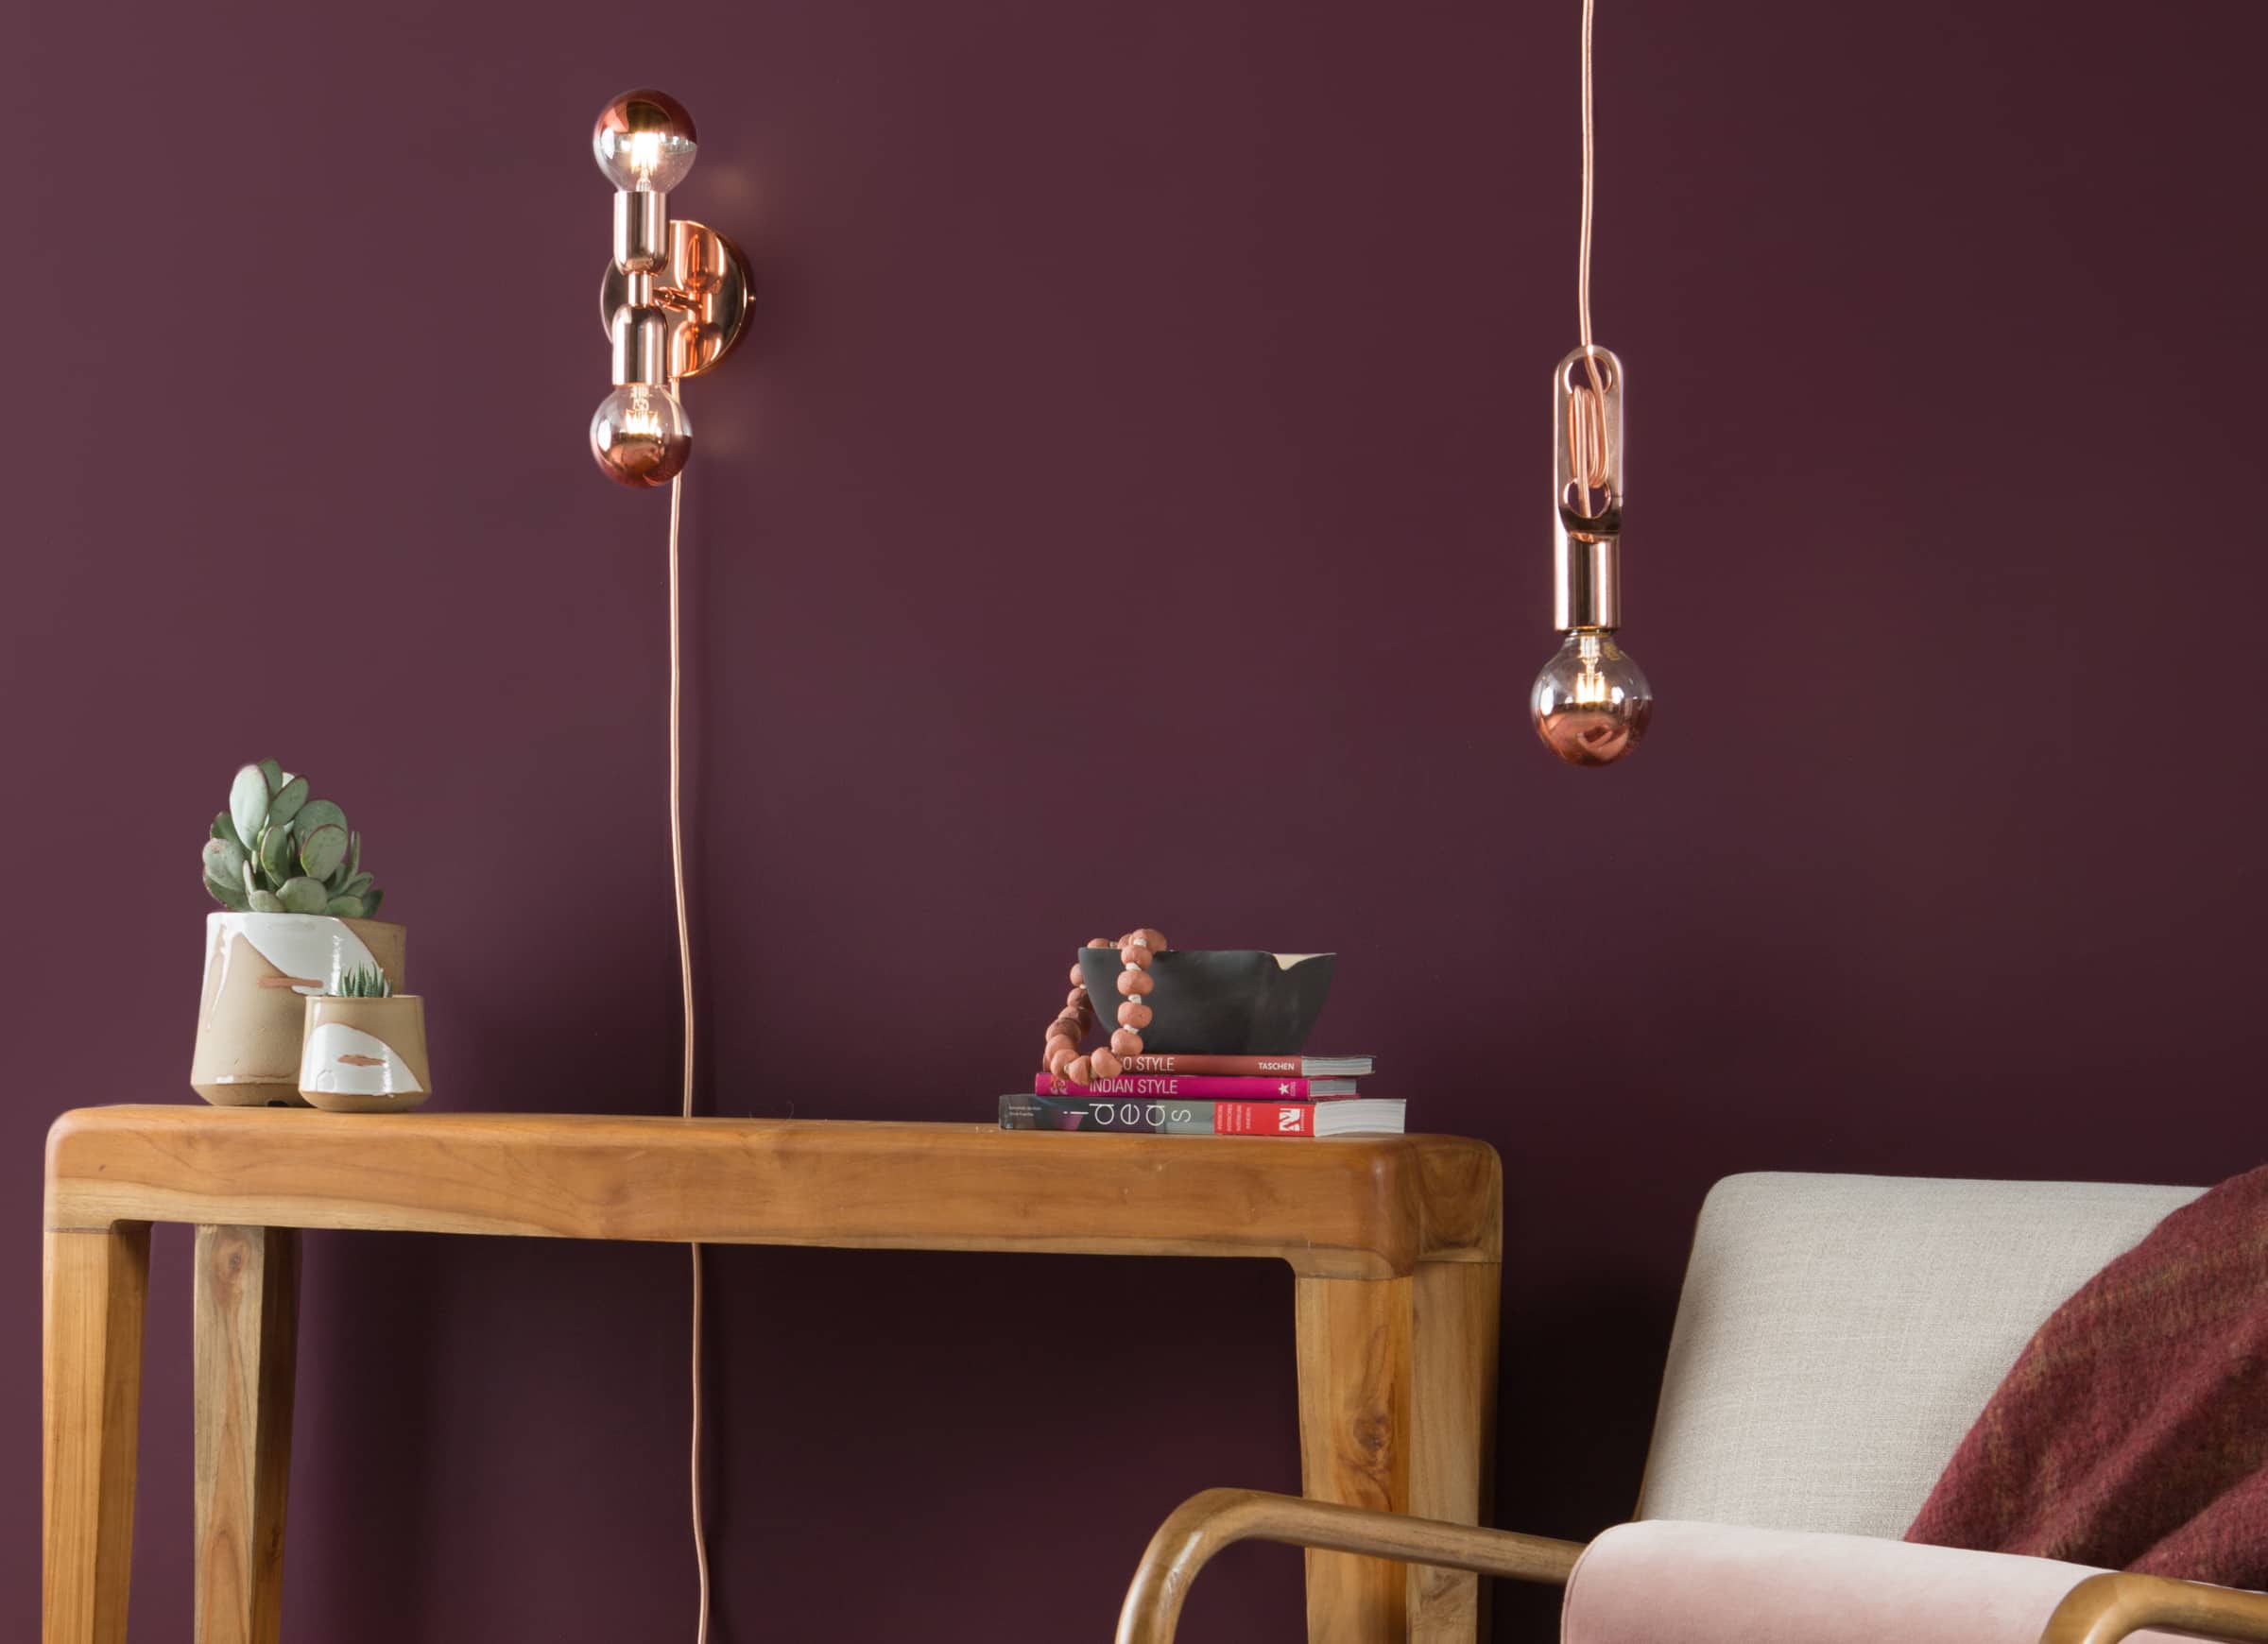 Room view with unction Mini Duo Plug-In Sconce in Polished copper on the wall above the console table. Wrap pendant in Polished copper above the chair